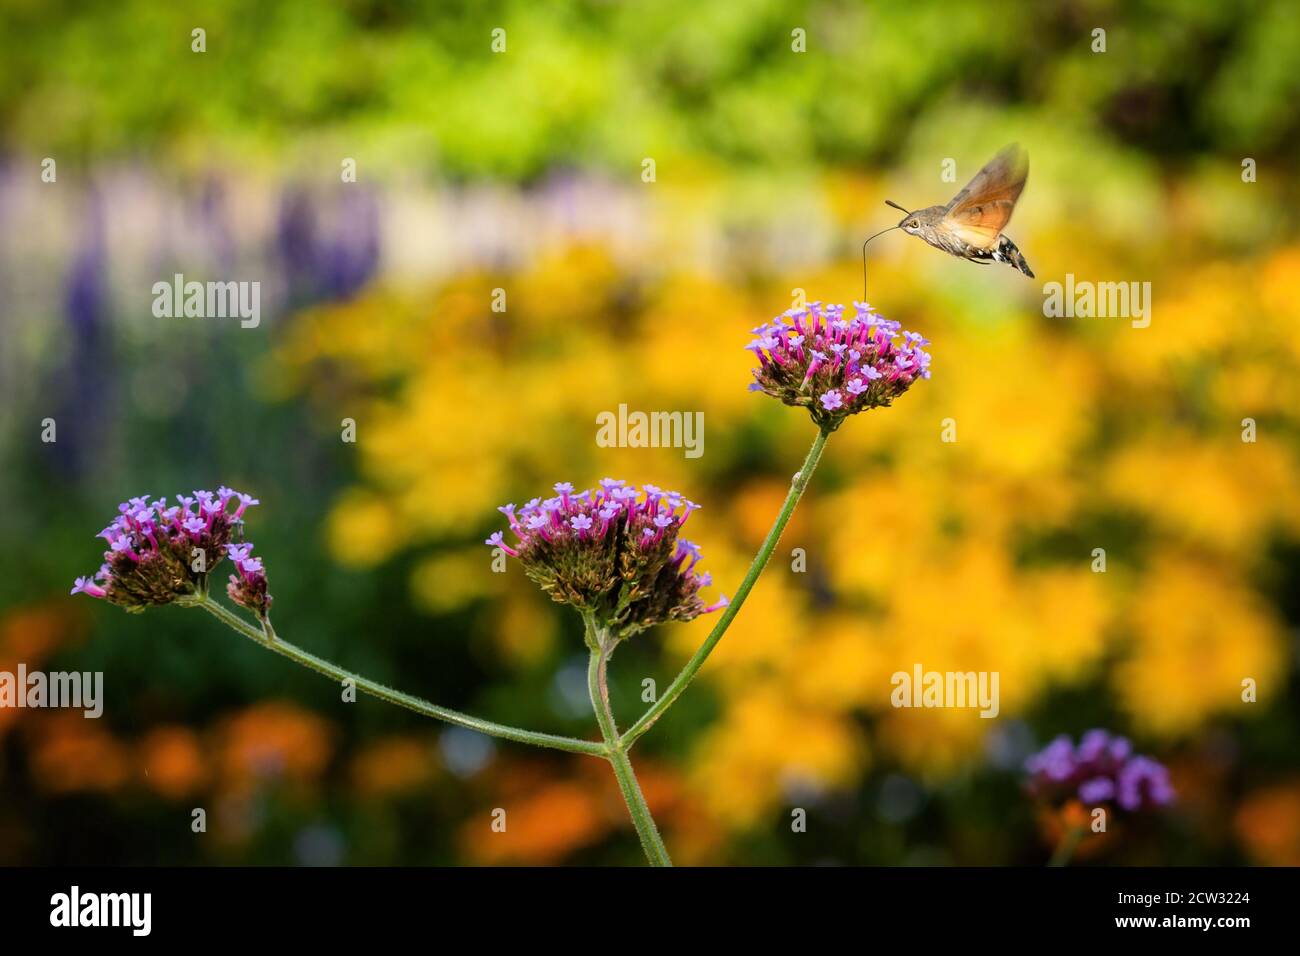 Tiny Hummingbird hawk-moth buzzing around violet flowers sampling nectar with its proboscis. Sunny autumn day in a park with colorful flowers. Stock Photo